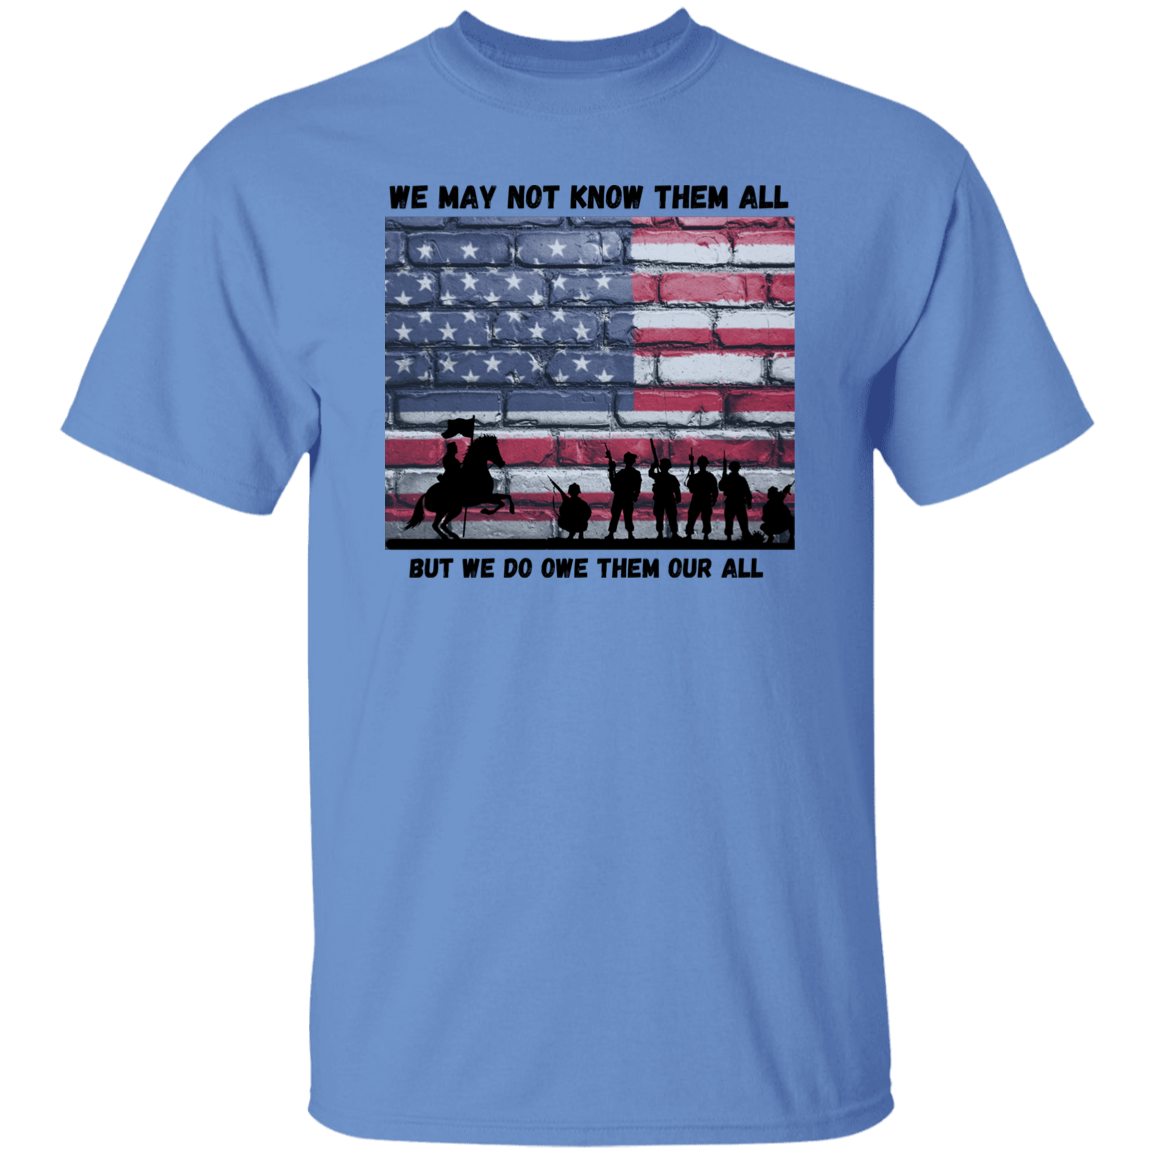 We May Not Know Them All But We Do Owe Them Our All Men's Women's T-Shirt Memorial Day